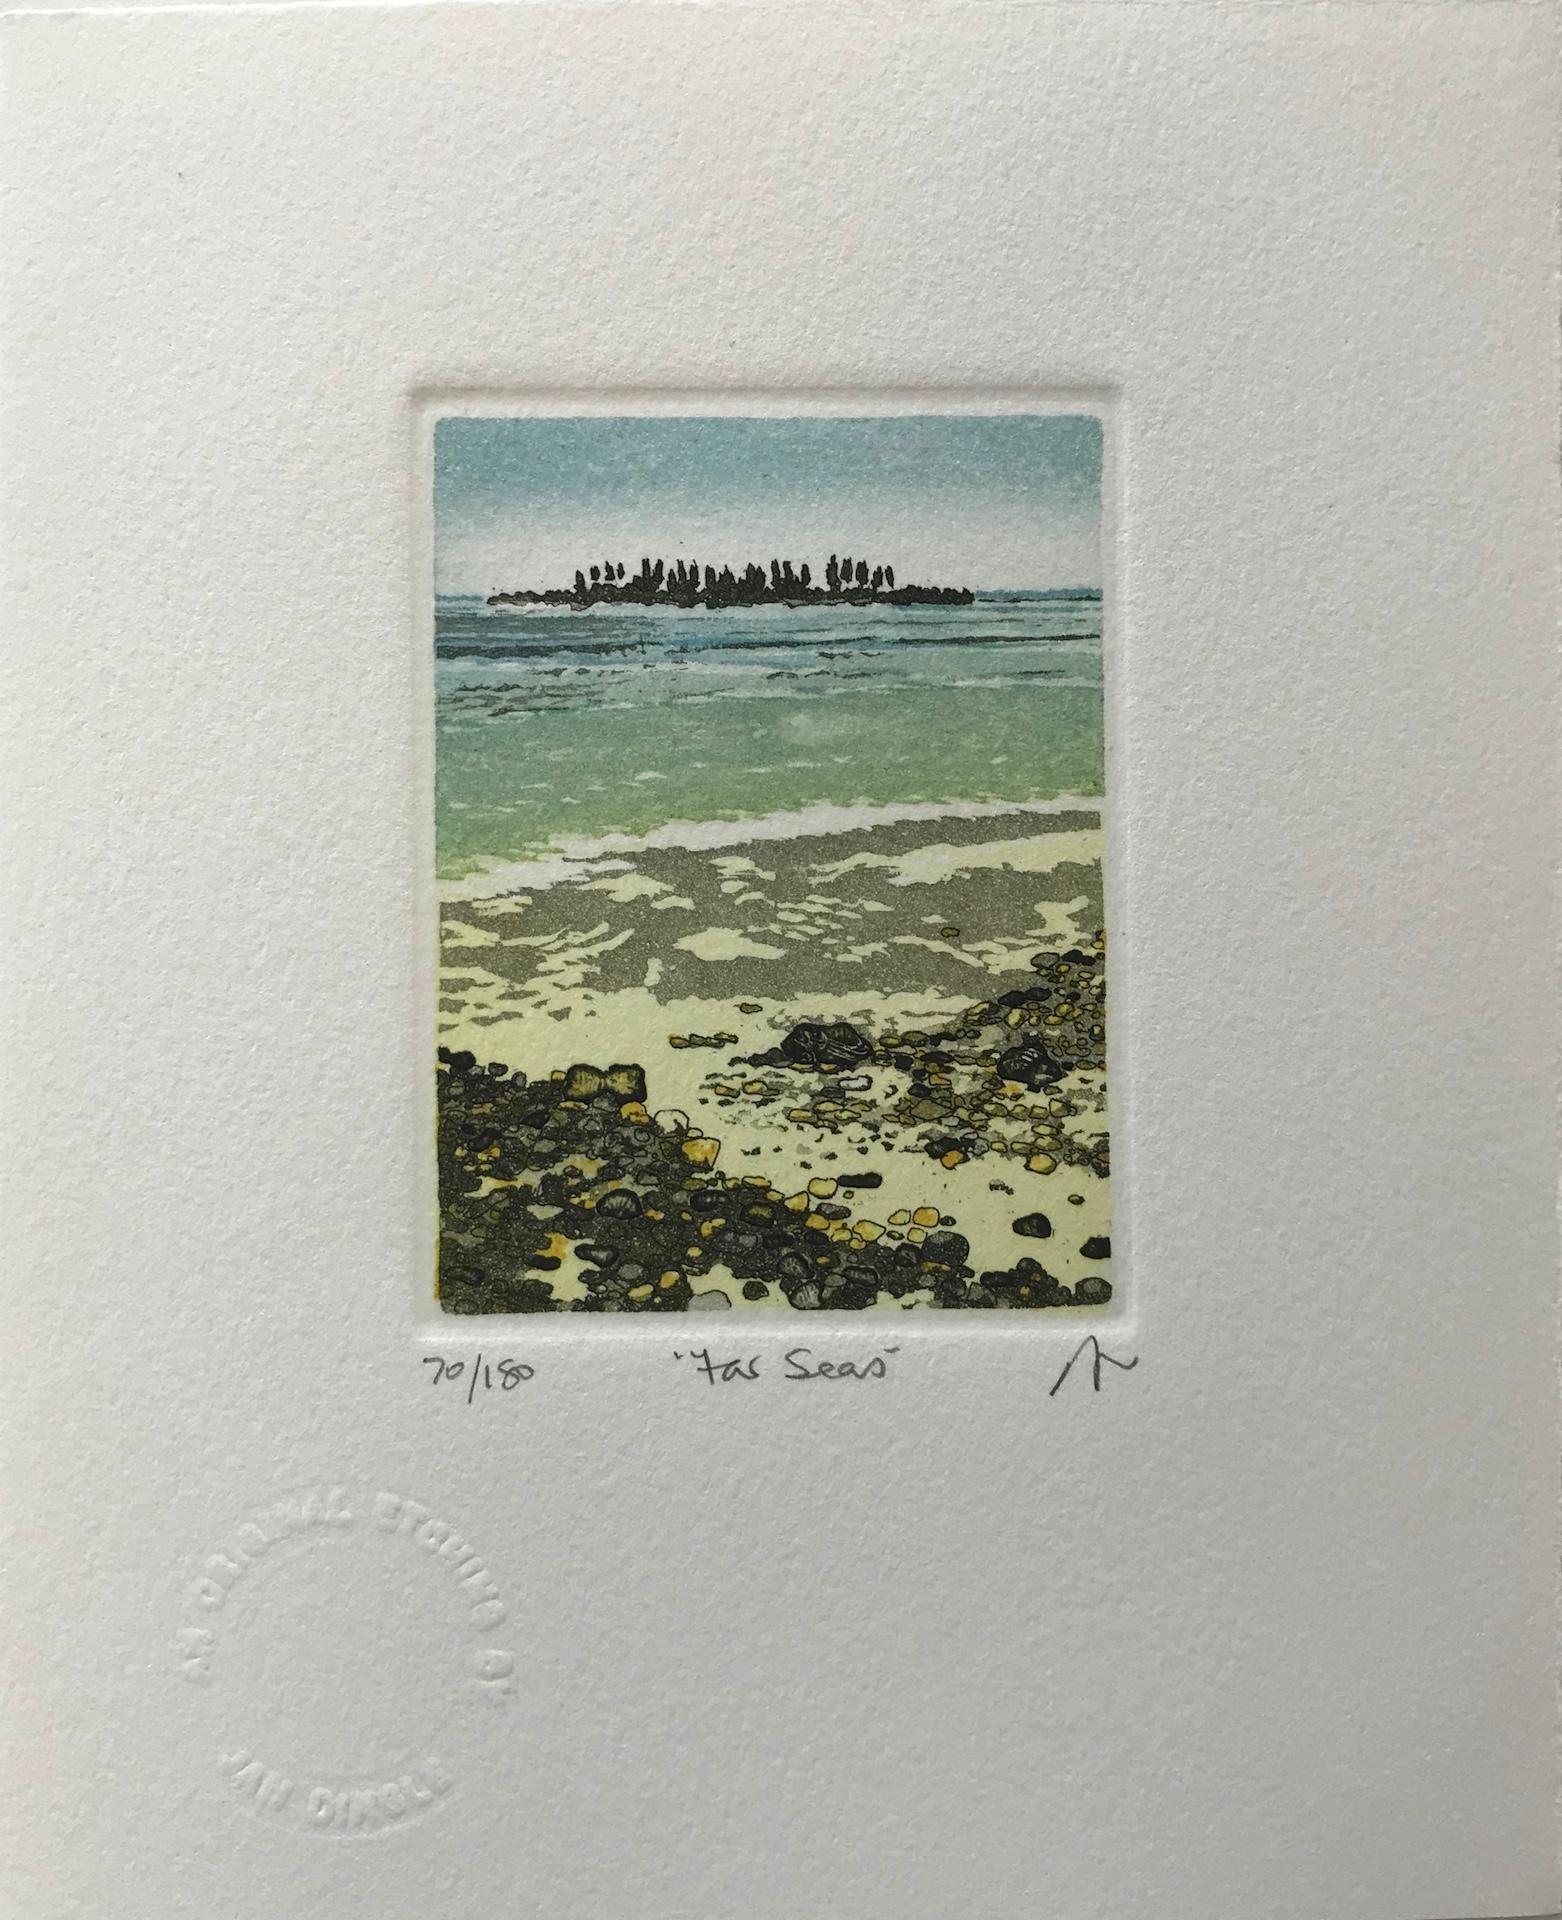 Jan Dingle
Far Seas
Limited Edition Etching Print
Edition of 180
Image Size: H 9cm x W 6.5cm
Sheet Size: H 19cm x W 15cm
Signed and Numbered
Sold Unframed
Please note that any insitu images are purely an indication of how a piece may look.

‘Far